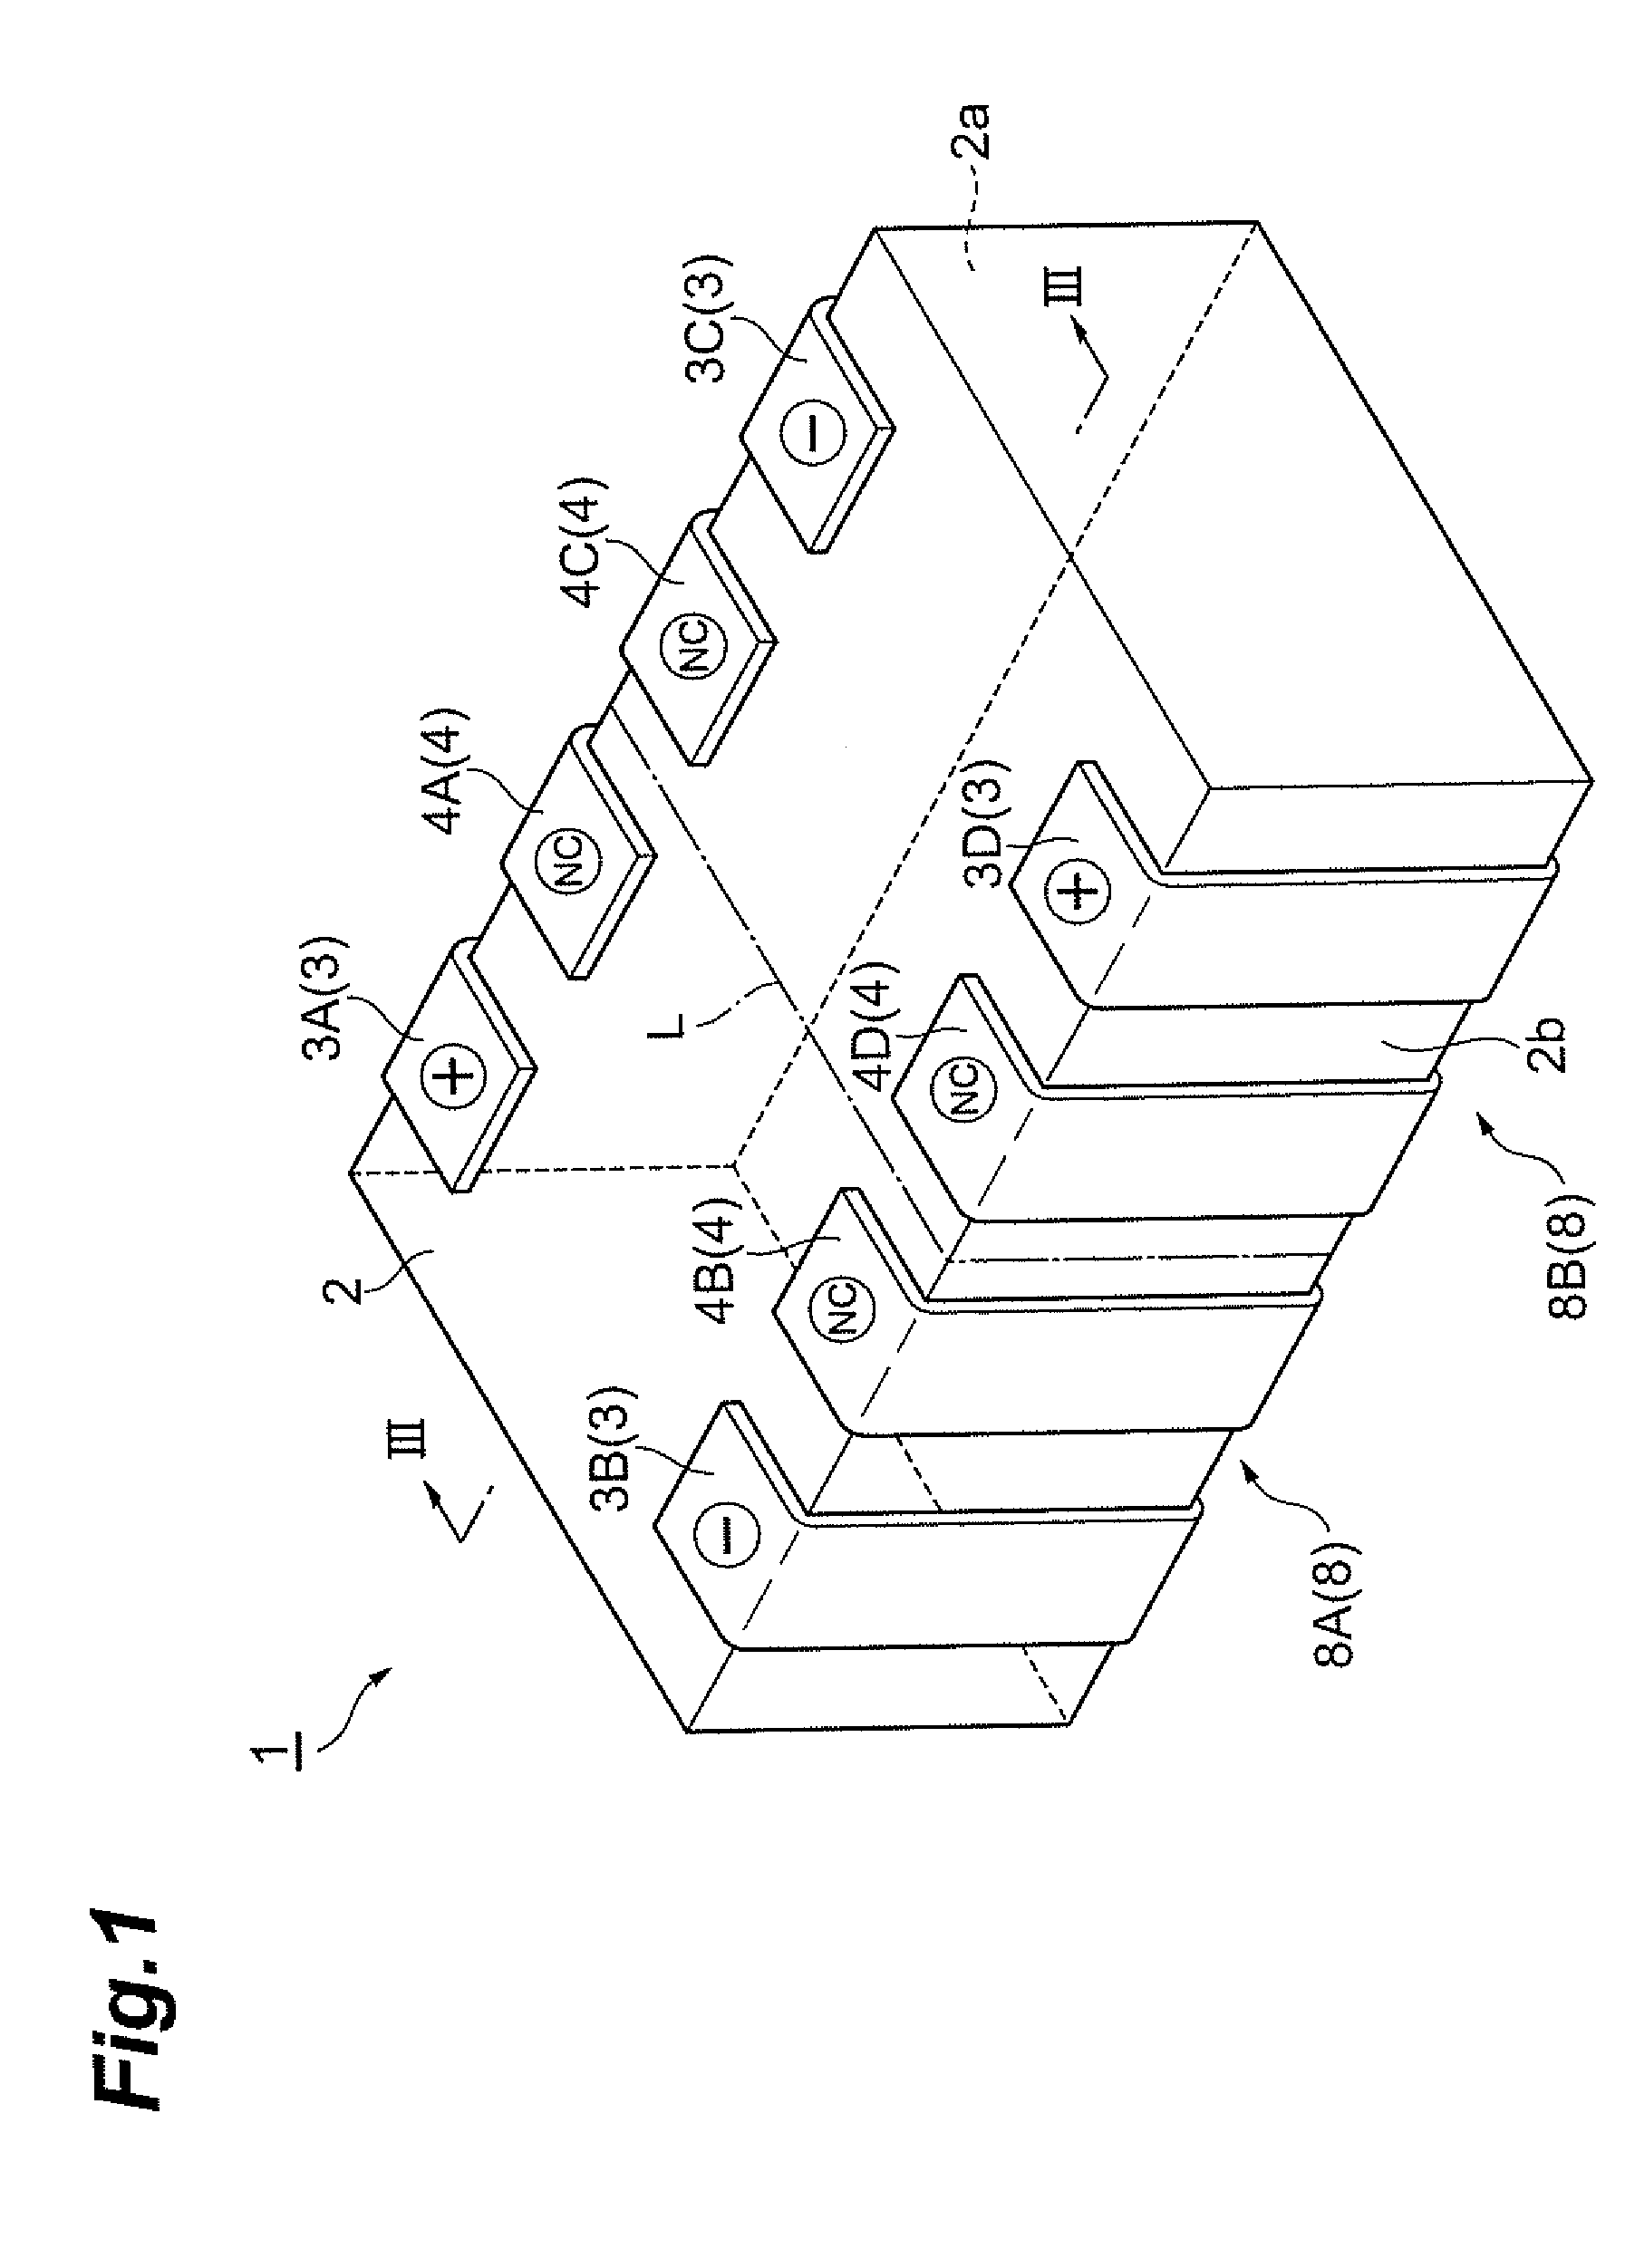 Multilayer capacitor array having terminal conductor, to which internal electrodes are connected in parallel, connected in series to external electrodes